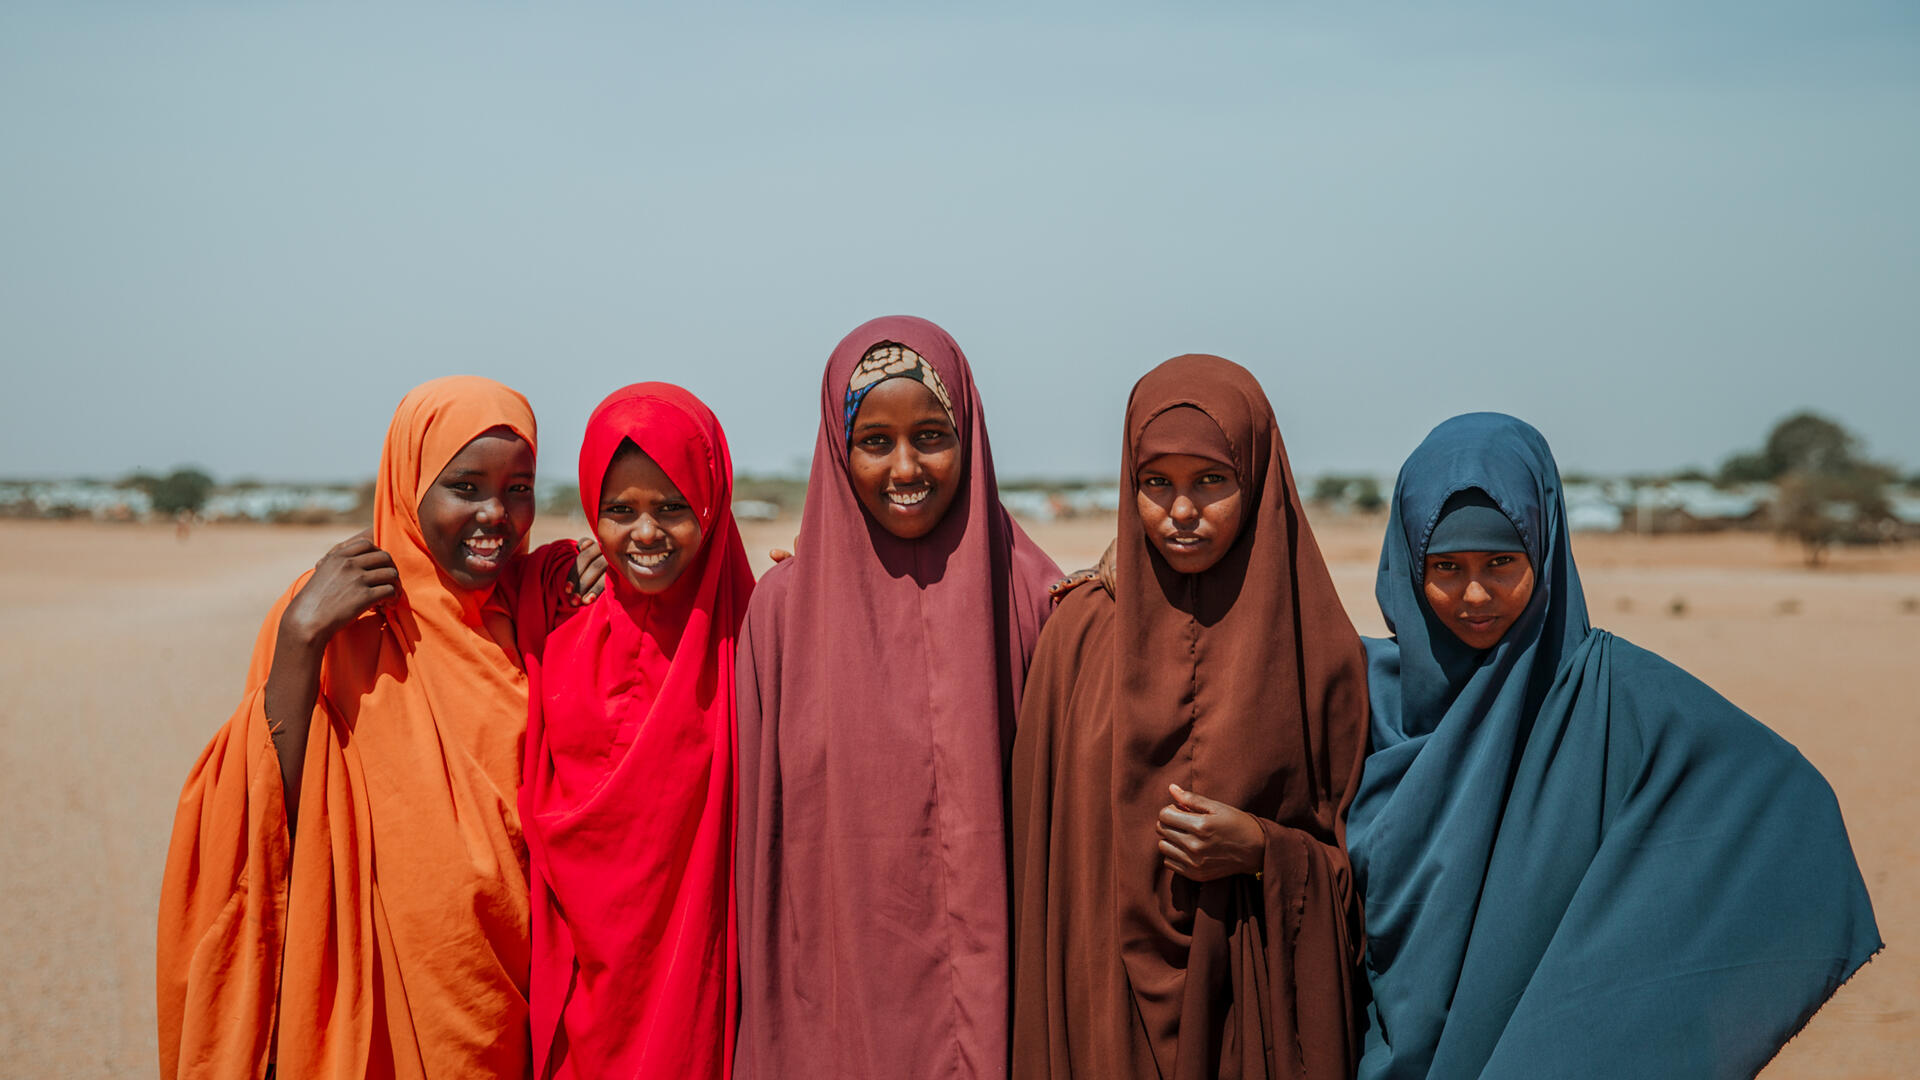 Five girls who are part of the IRC's Girl Shine program -- Ampia, Asha, Hibo, Shamsa, and Nurta --  stand together for a photo in a dry landscape in Ethiopia.